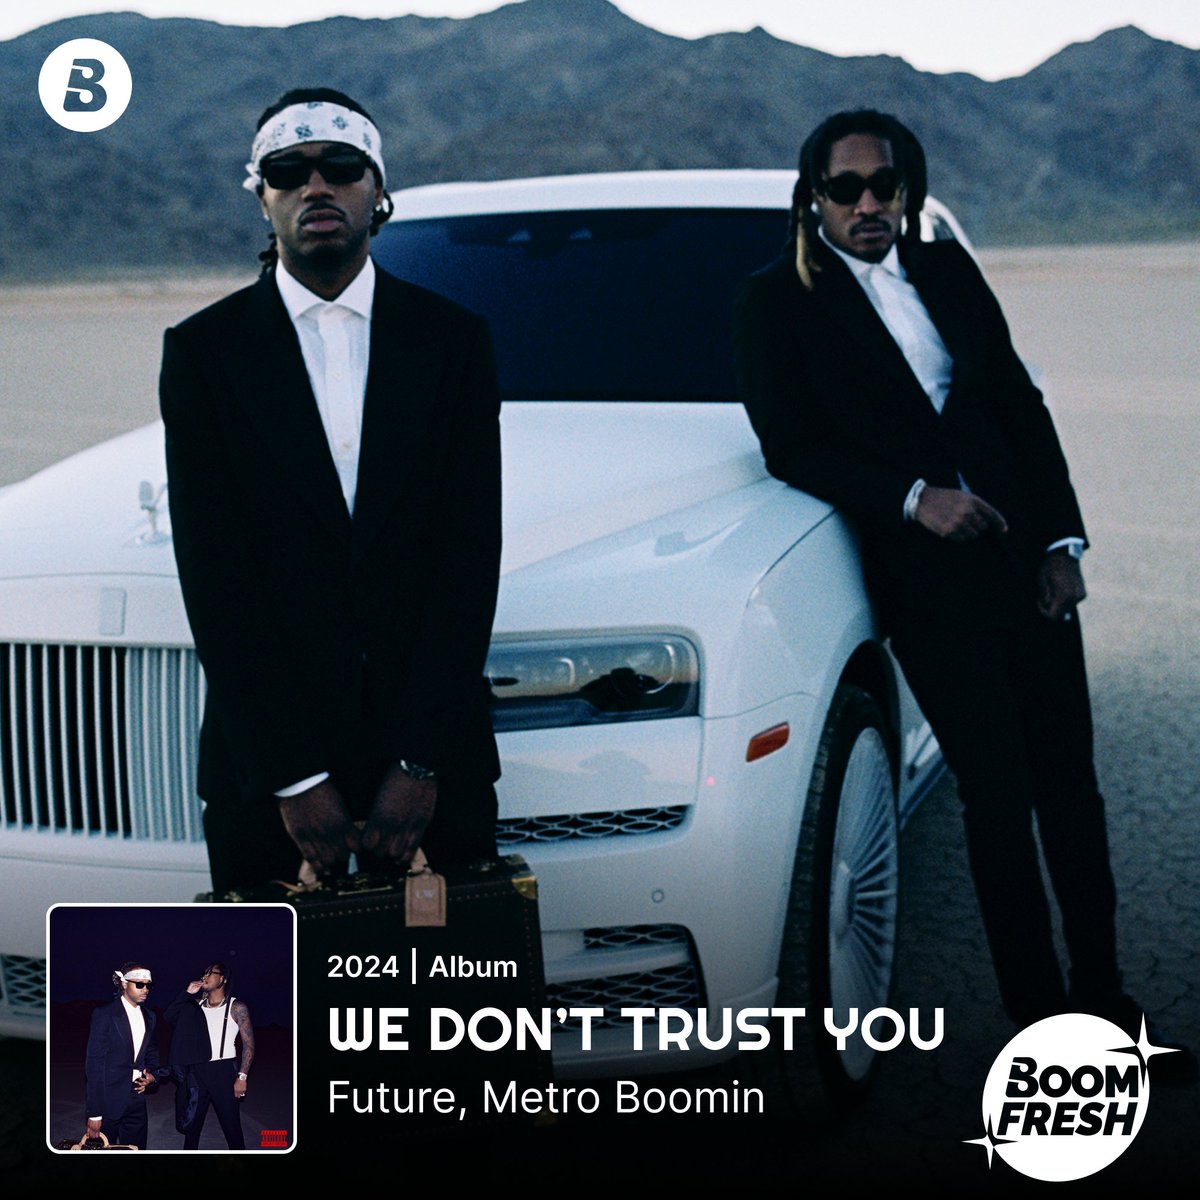 Now playing ▶ #WeDontTrustYou #WDTY from @1Future X @MetroBoomin 🔥🕶 Boom.lnk.to/WEDONTTRUSTYOU #MetroBoomin #Future #Boomfresh #Boomplay #NewMusic